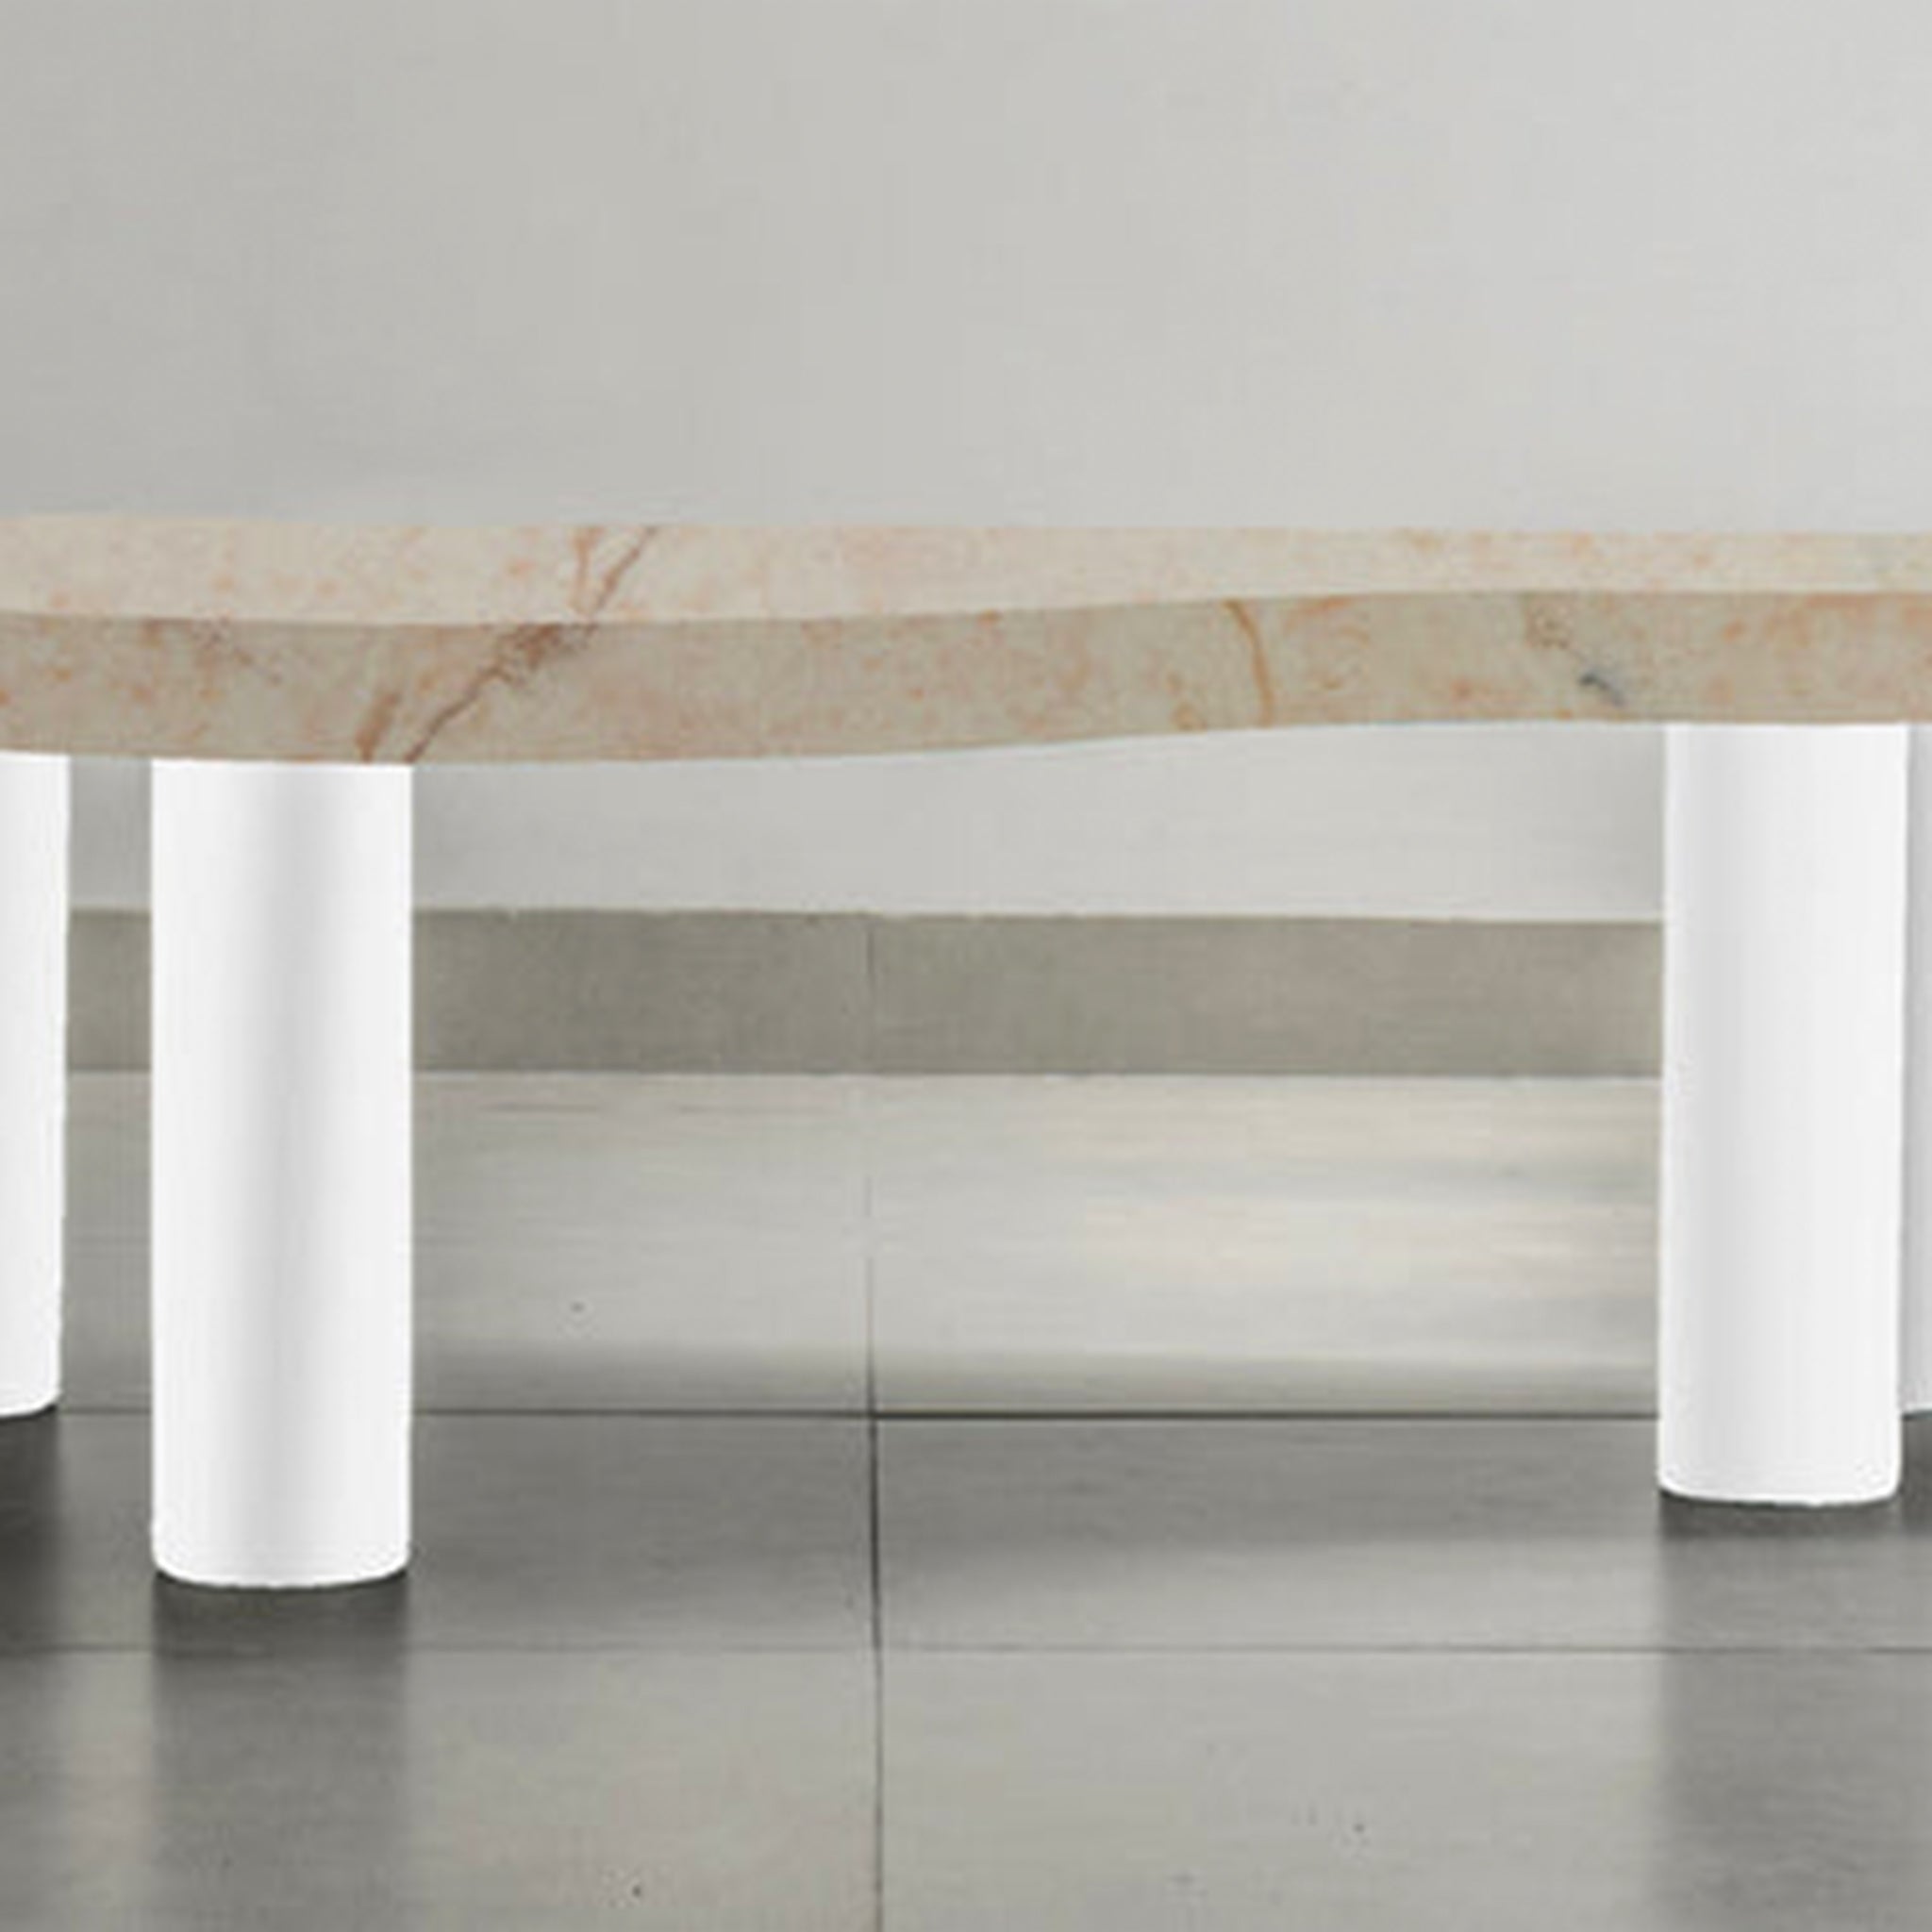 Coffee Table with Character: The Peggy table's free-form design makes a statement. 